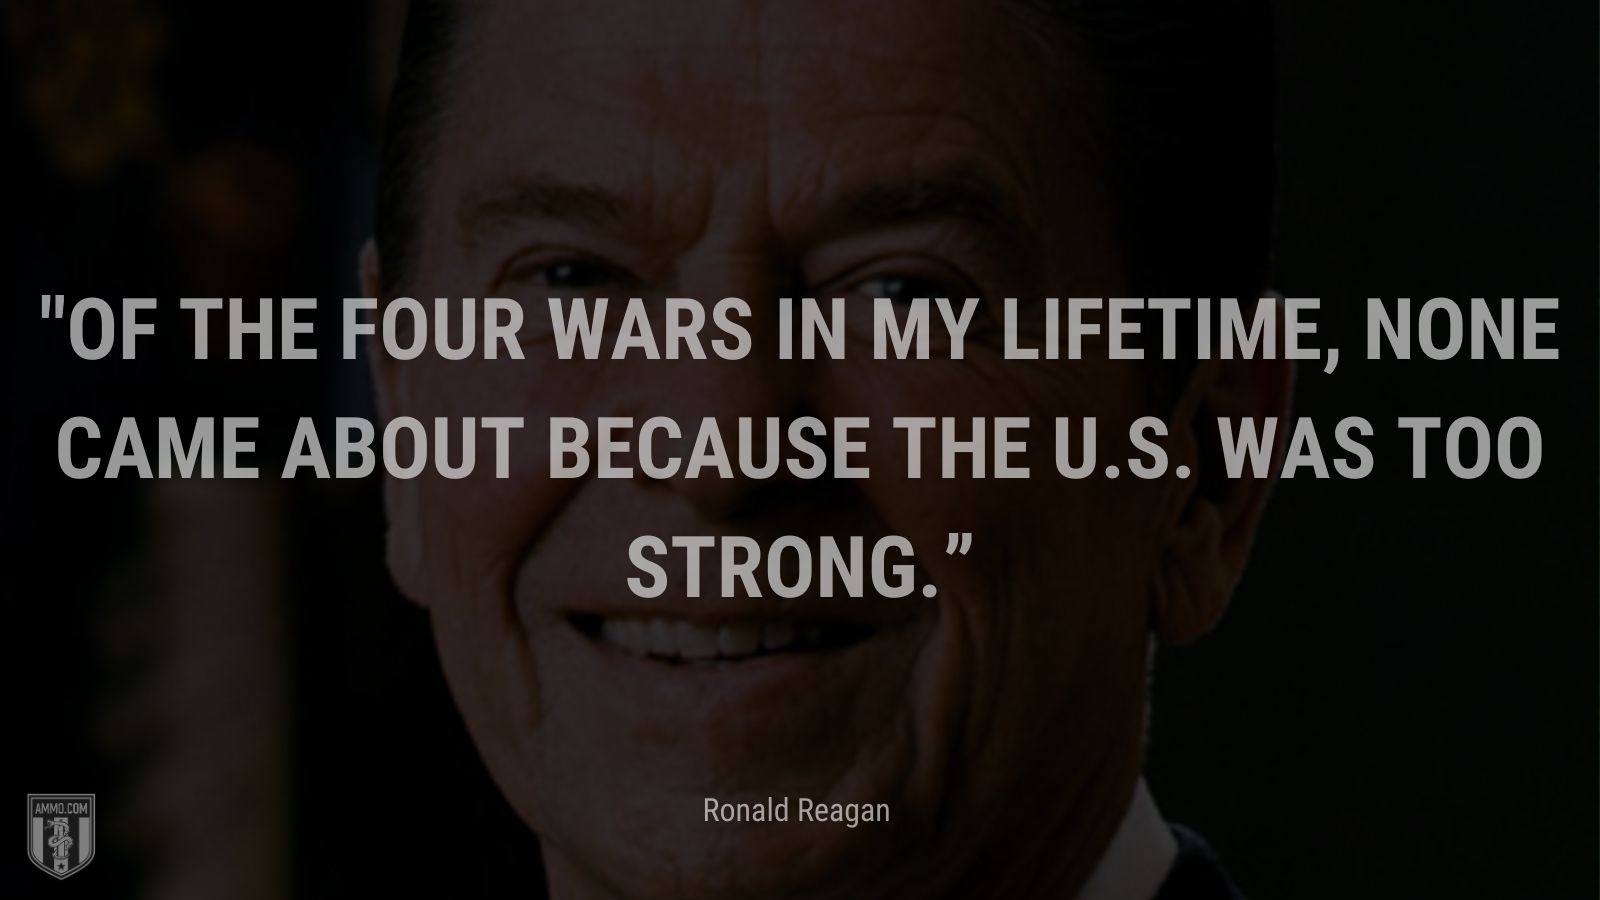 “Of the four wars in my lifetime, none came about because the U.S. was too strong.” - Ronald Reagan